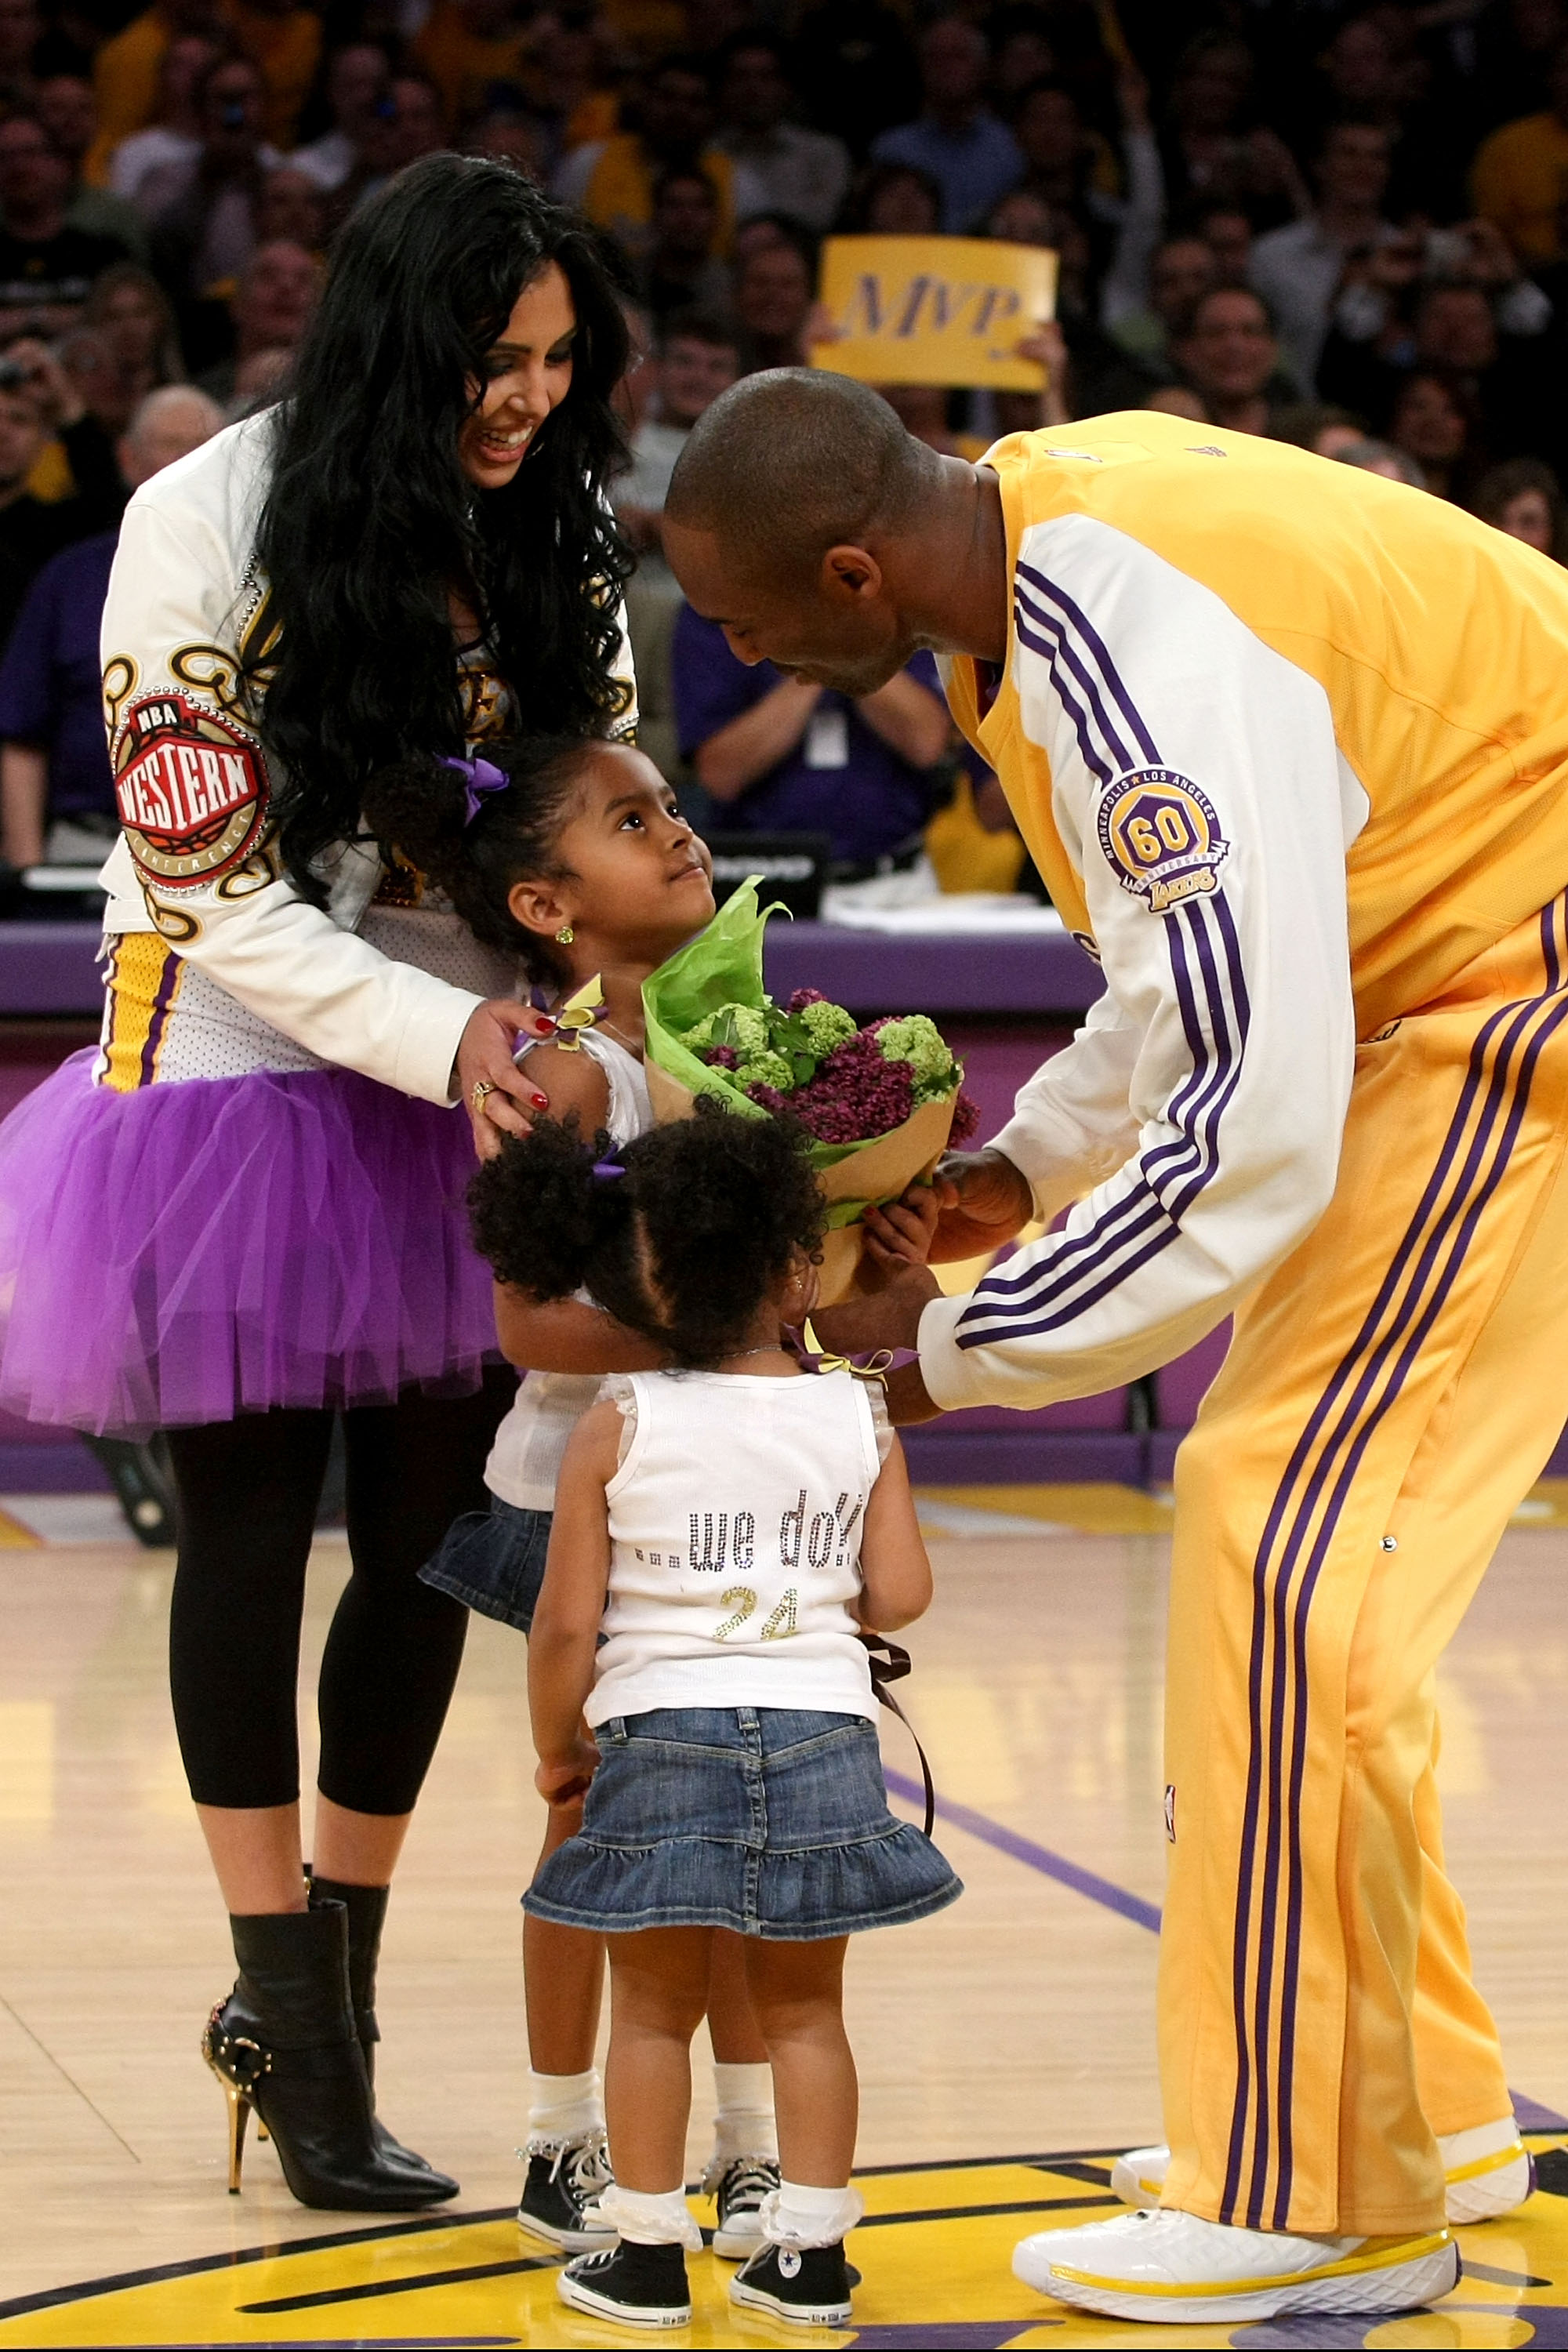 Vanessa Bryant, Natalia Bryant, Gianna Bryant and Kobe Bryant during the 2008 NBA Playoffs in Los Angeles, California | Source: Getty Images